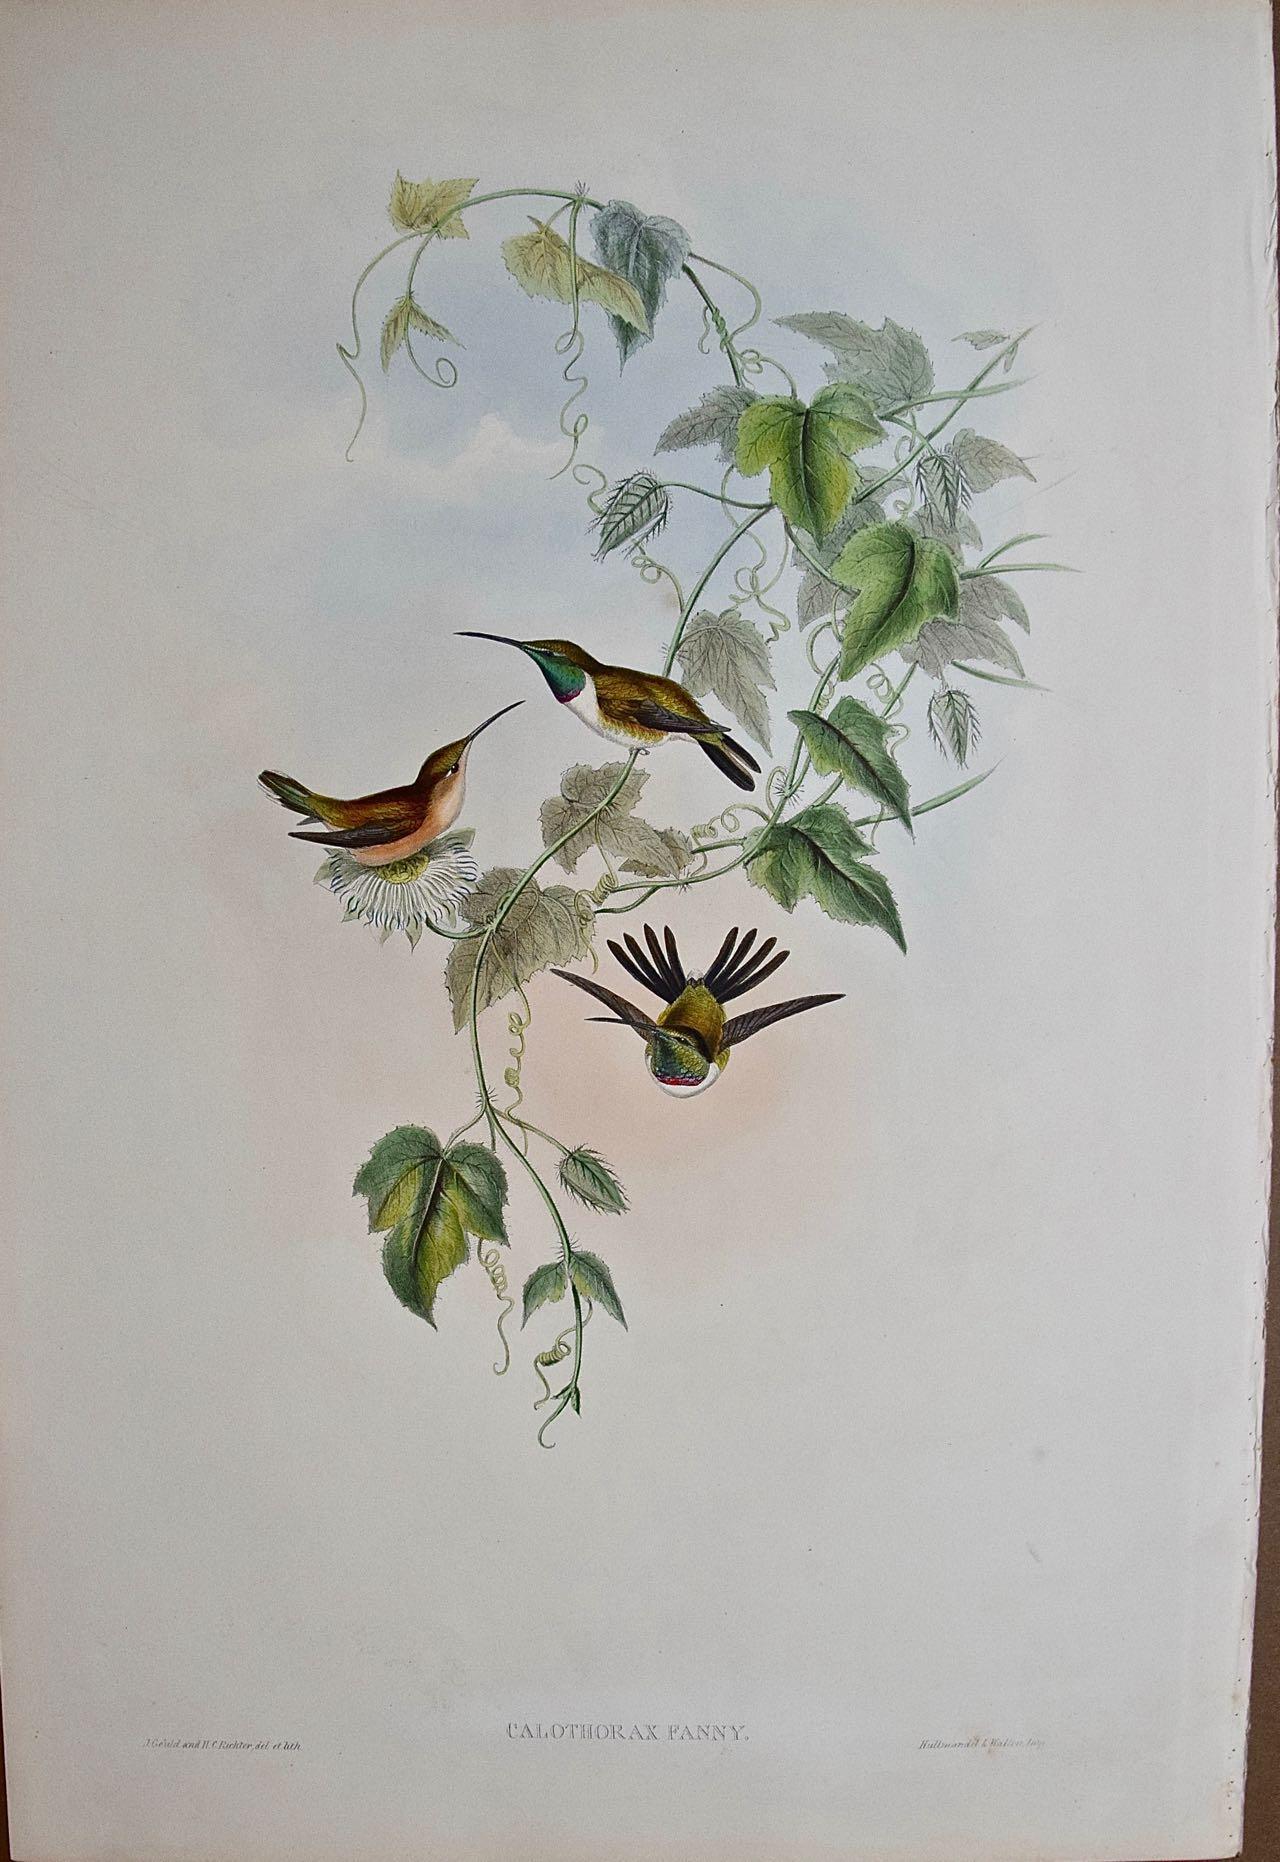 John Gould and Henry Constantine Richter Landscape Print - 19th C. Gould Hand-Colored "Fanny's Calothorax" Wood Star Hummingbirds